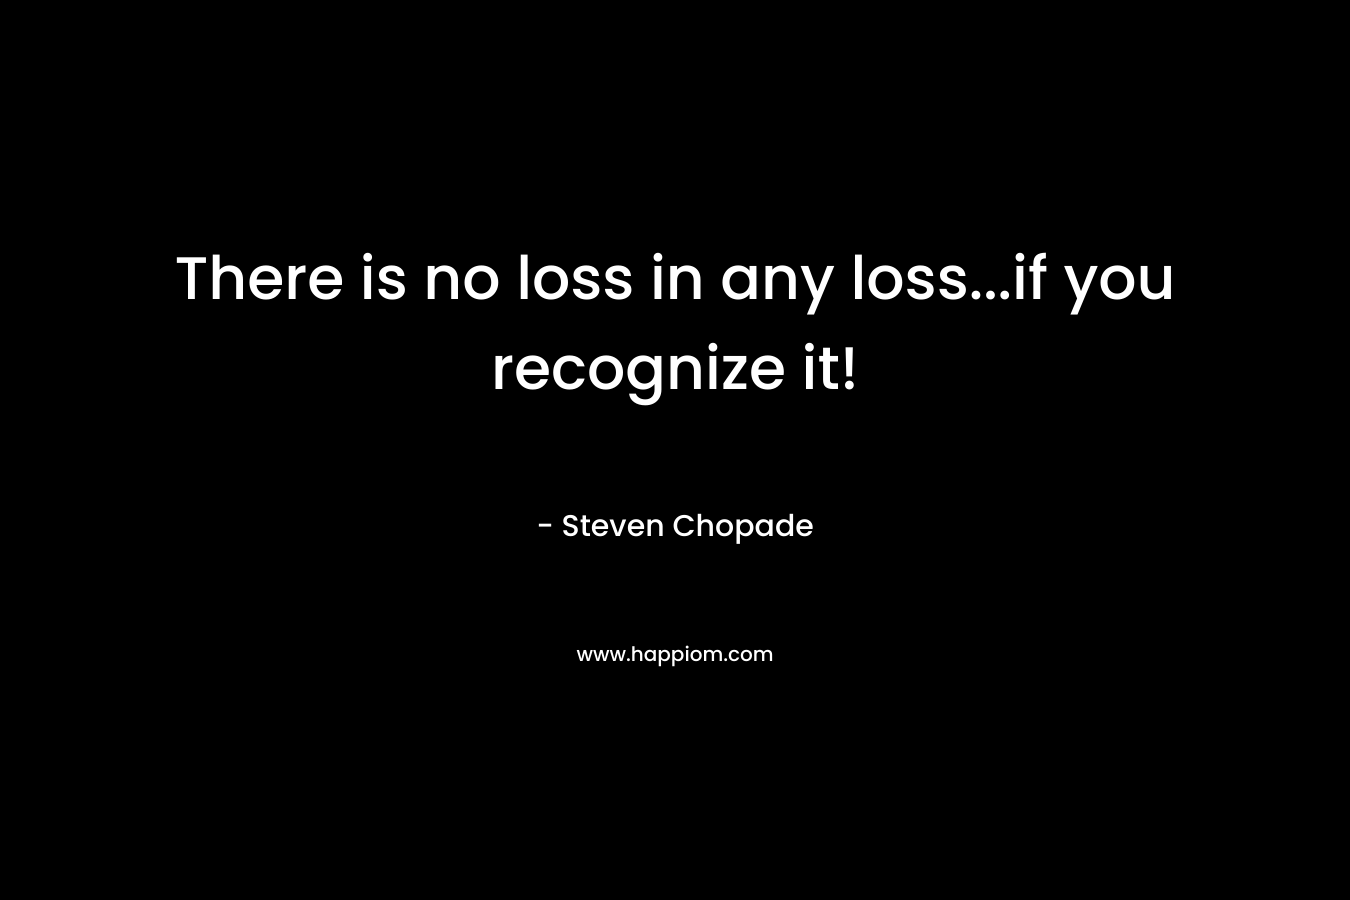 There is no loss in any loss...if you recognize it!